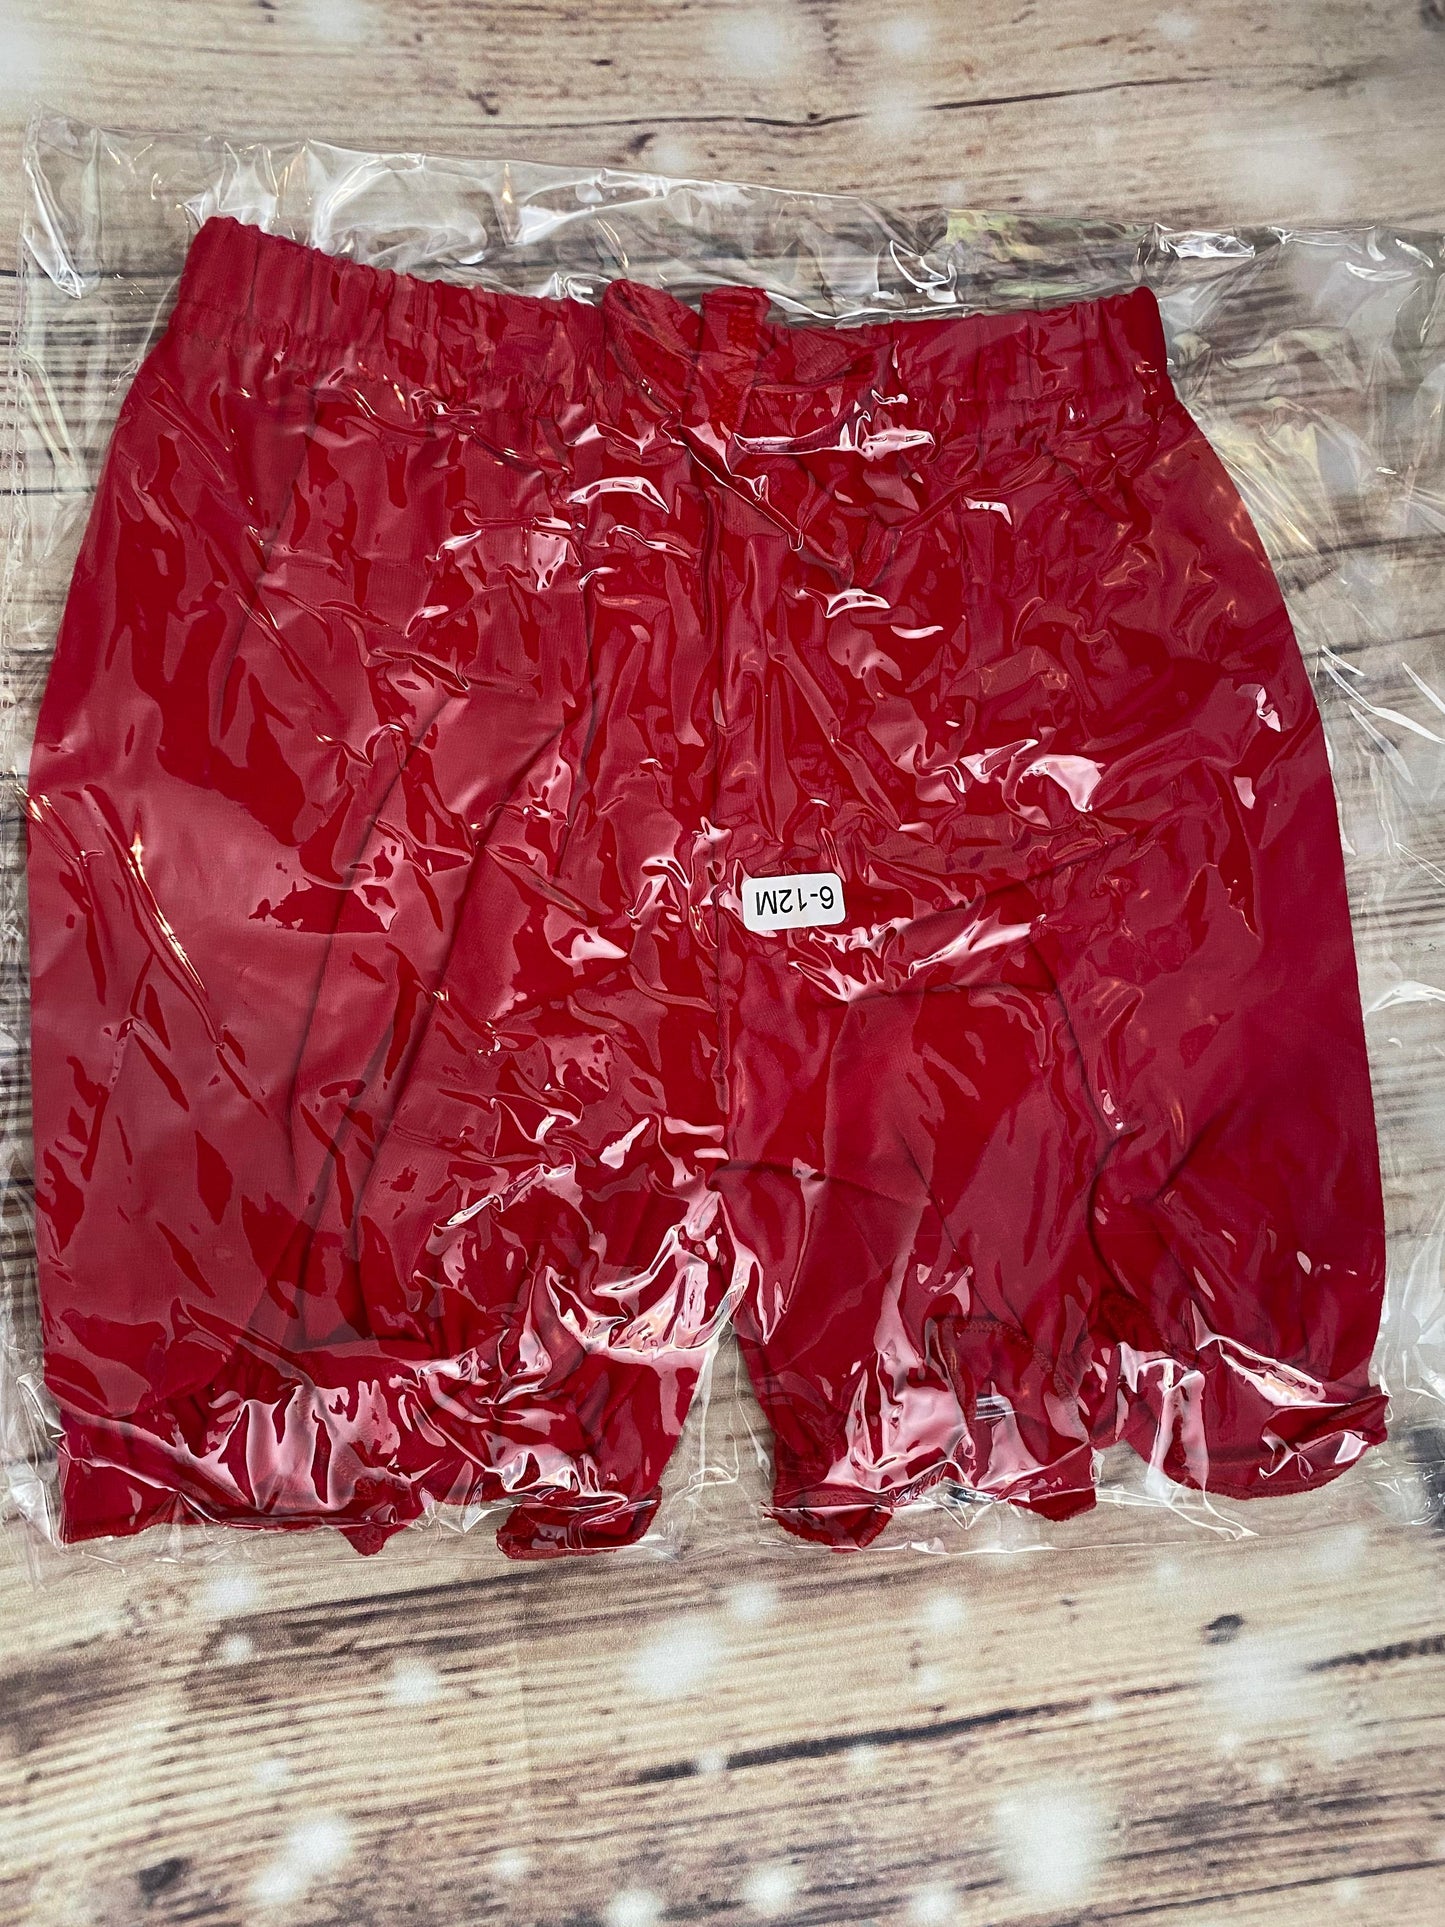 PLAIN RED GIRL BUBBLE SHORTS - ON HAND